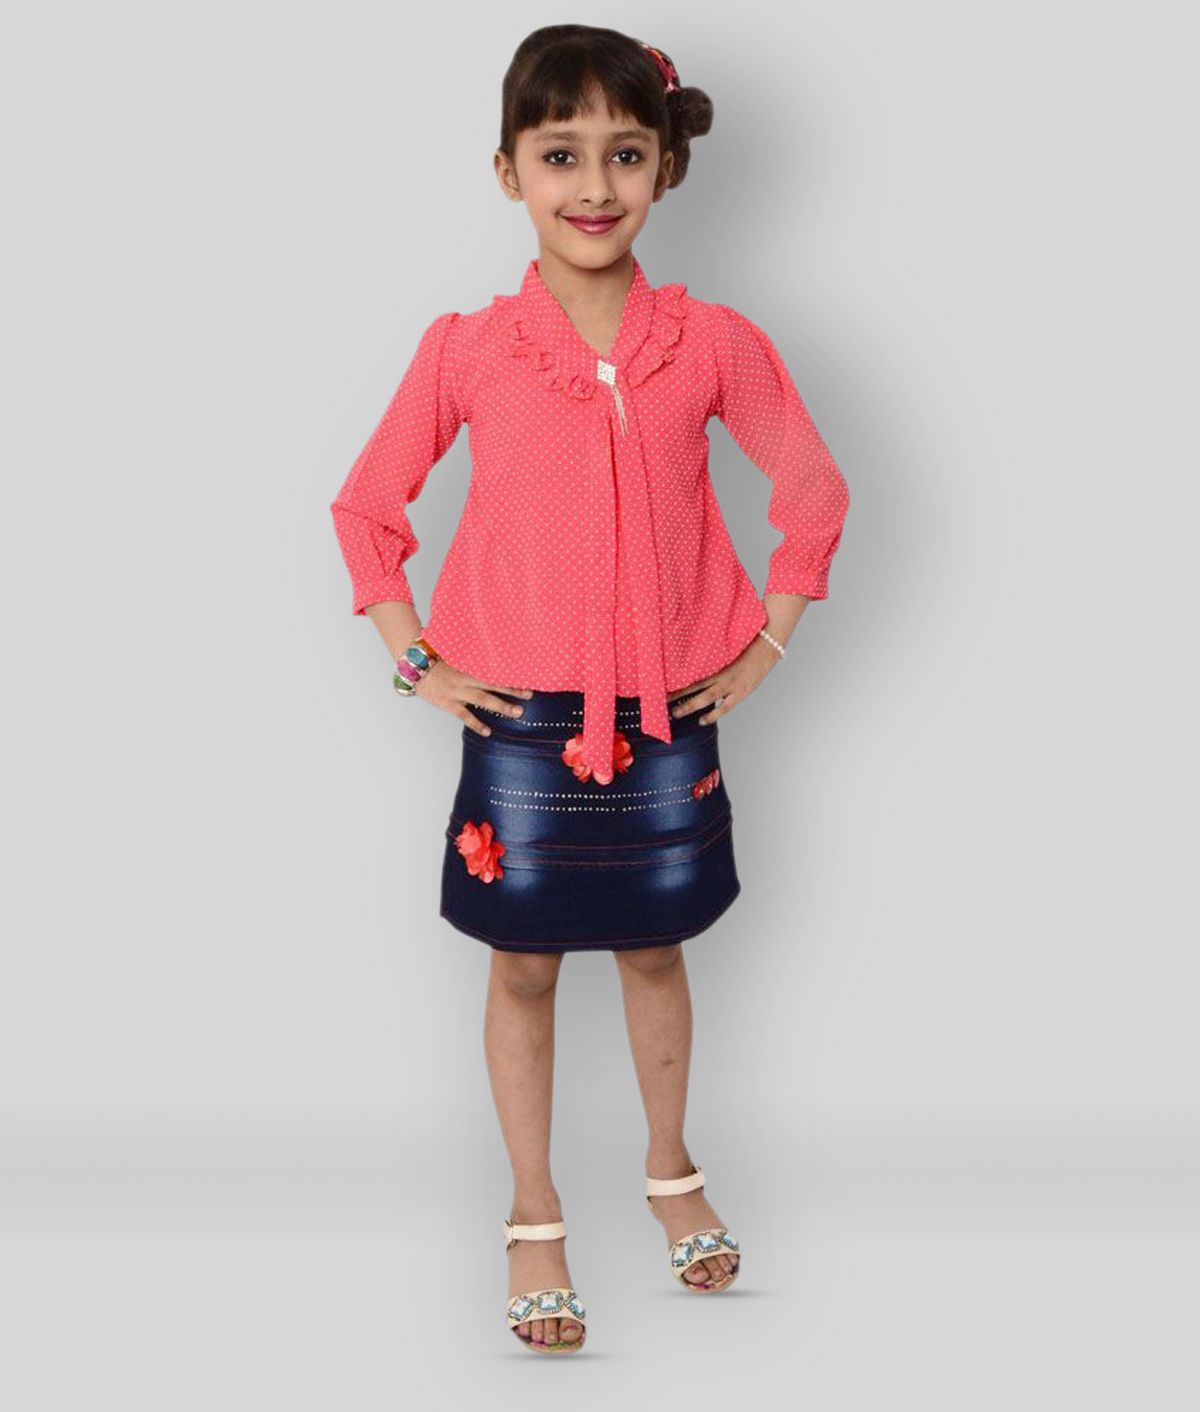     			Arshia Fashions - Multicolor Cotton Blend Girl's Shirt Dress ( Pack of 1 )